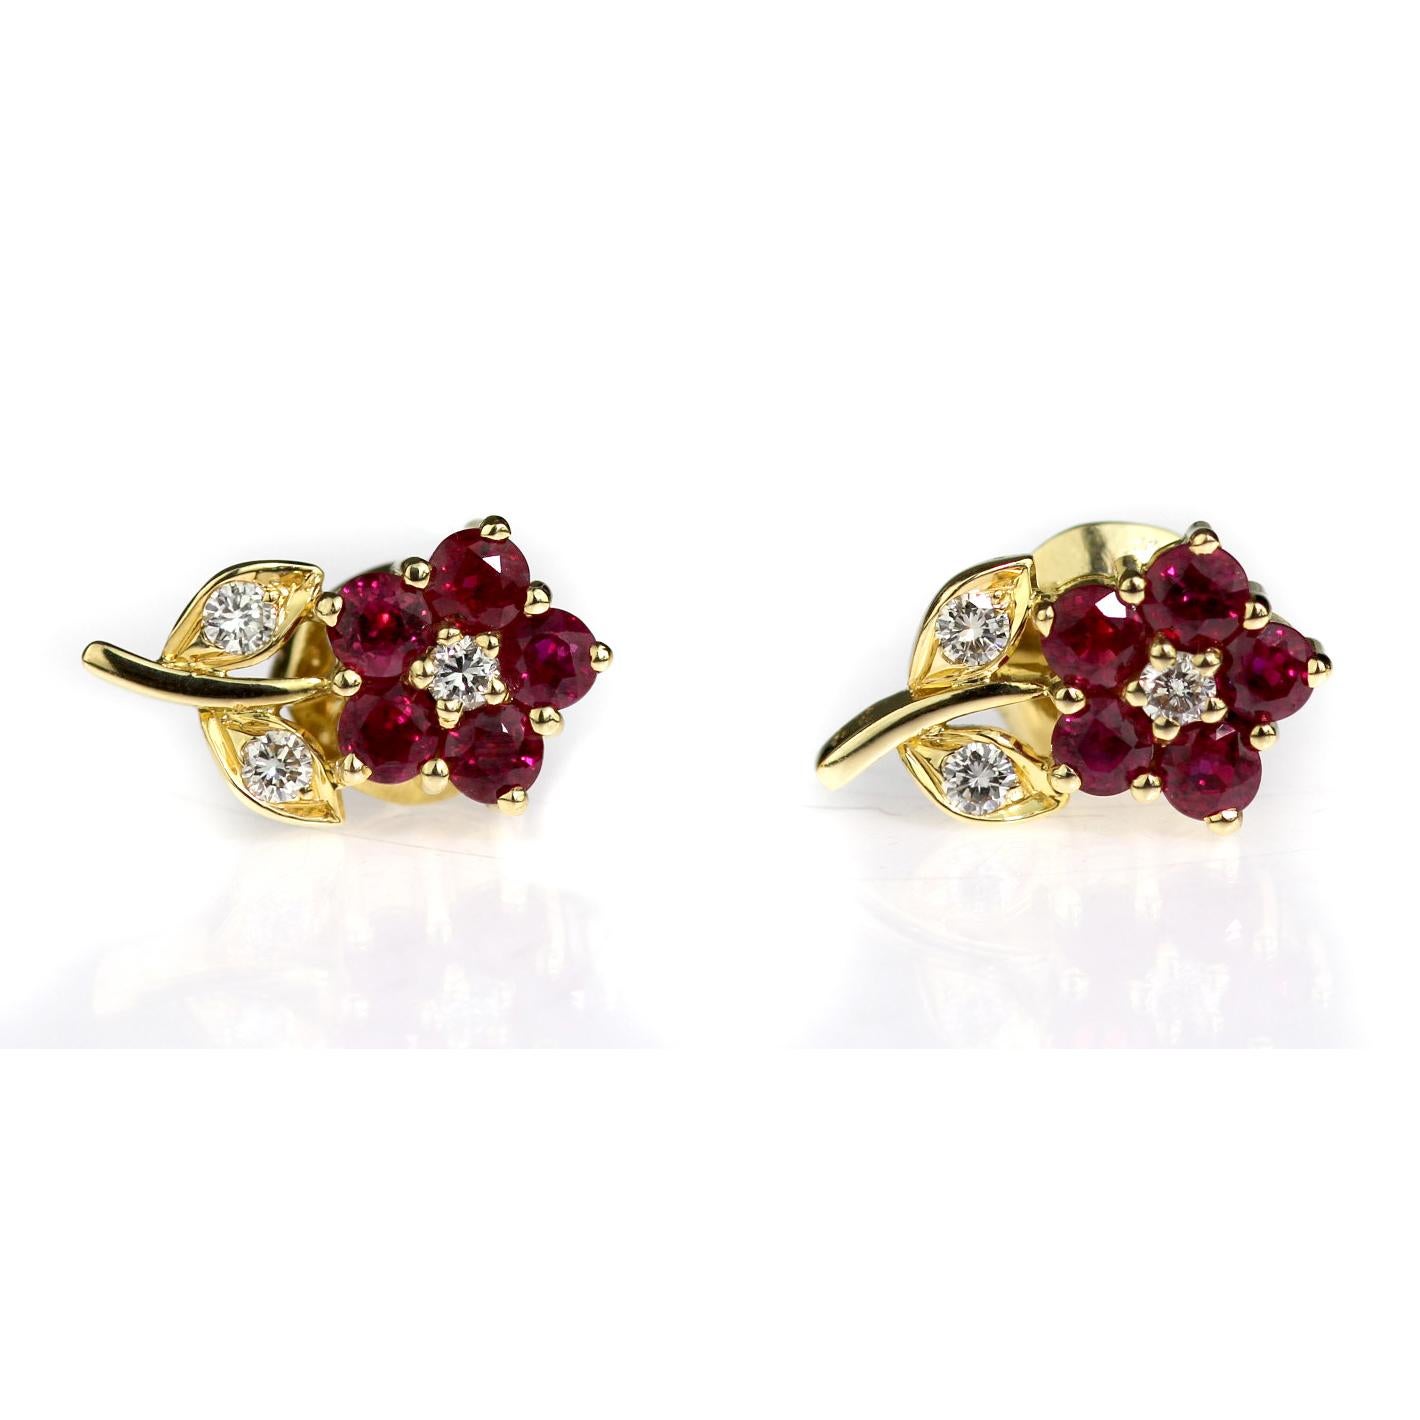 A pair of earrings set with round brilliant cut diamonds and round cut vivid red rubies. Set in 18 carat yellow gold with pin and push on butterfly fittings.
6 x round brilliant cut diamonds, approximate total weight 0.24 carats, assessed colour